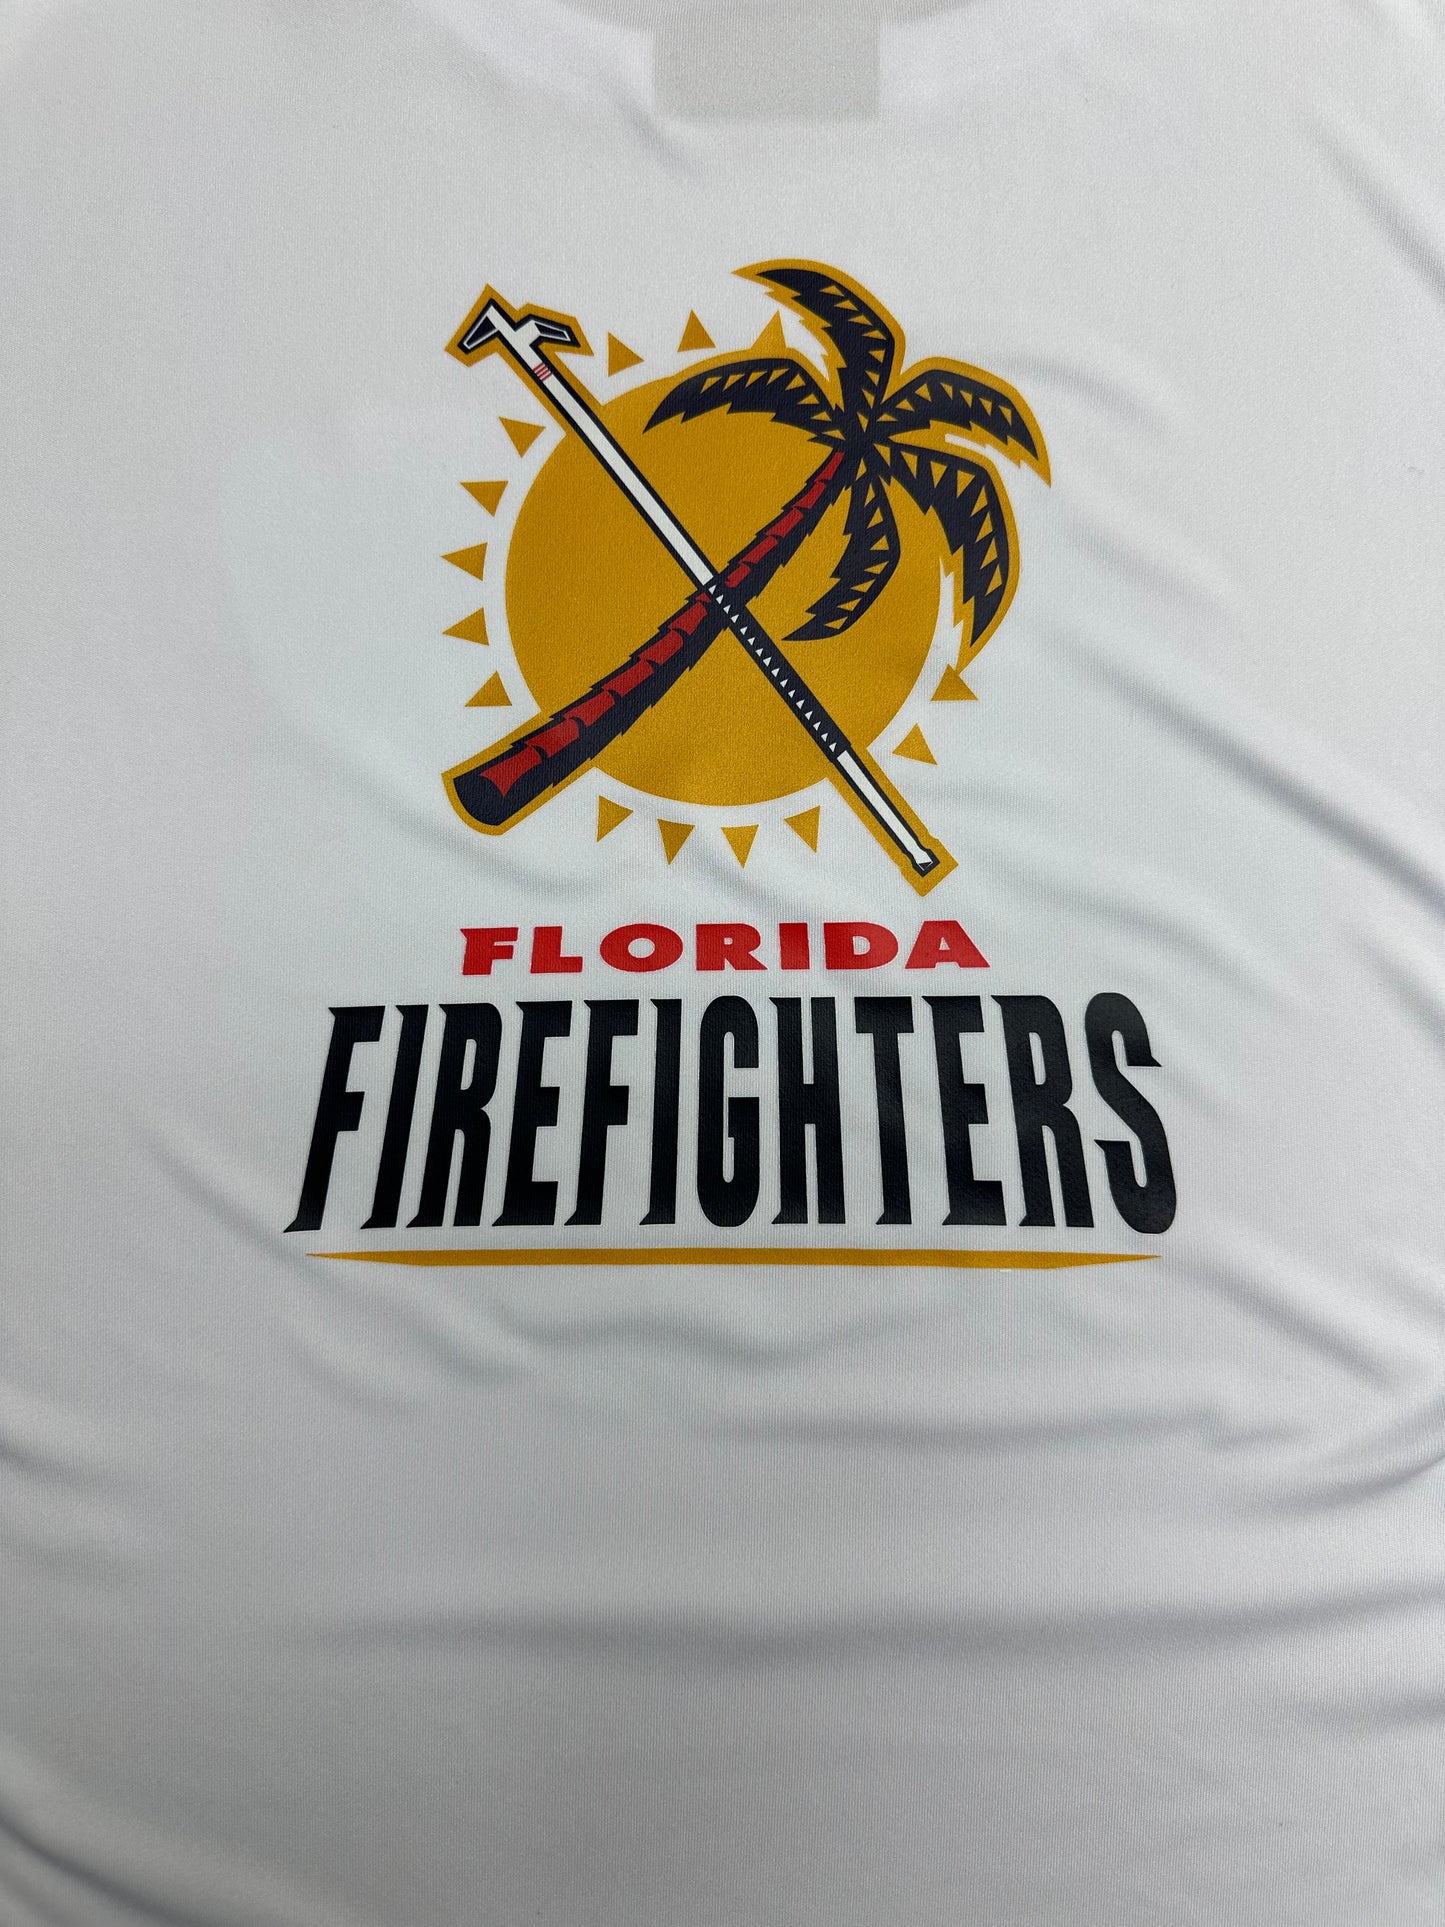 Florida Firefighters “Panthers” inspired Drifit